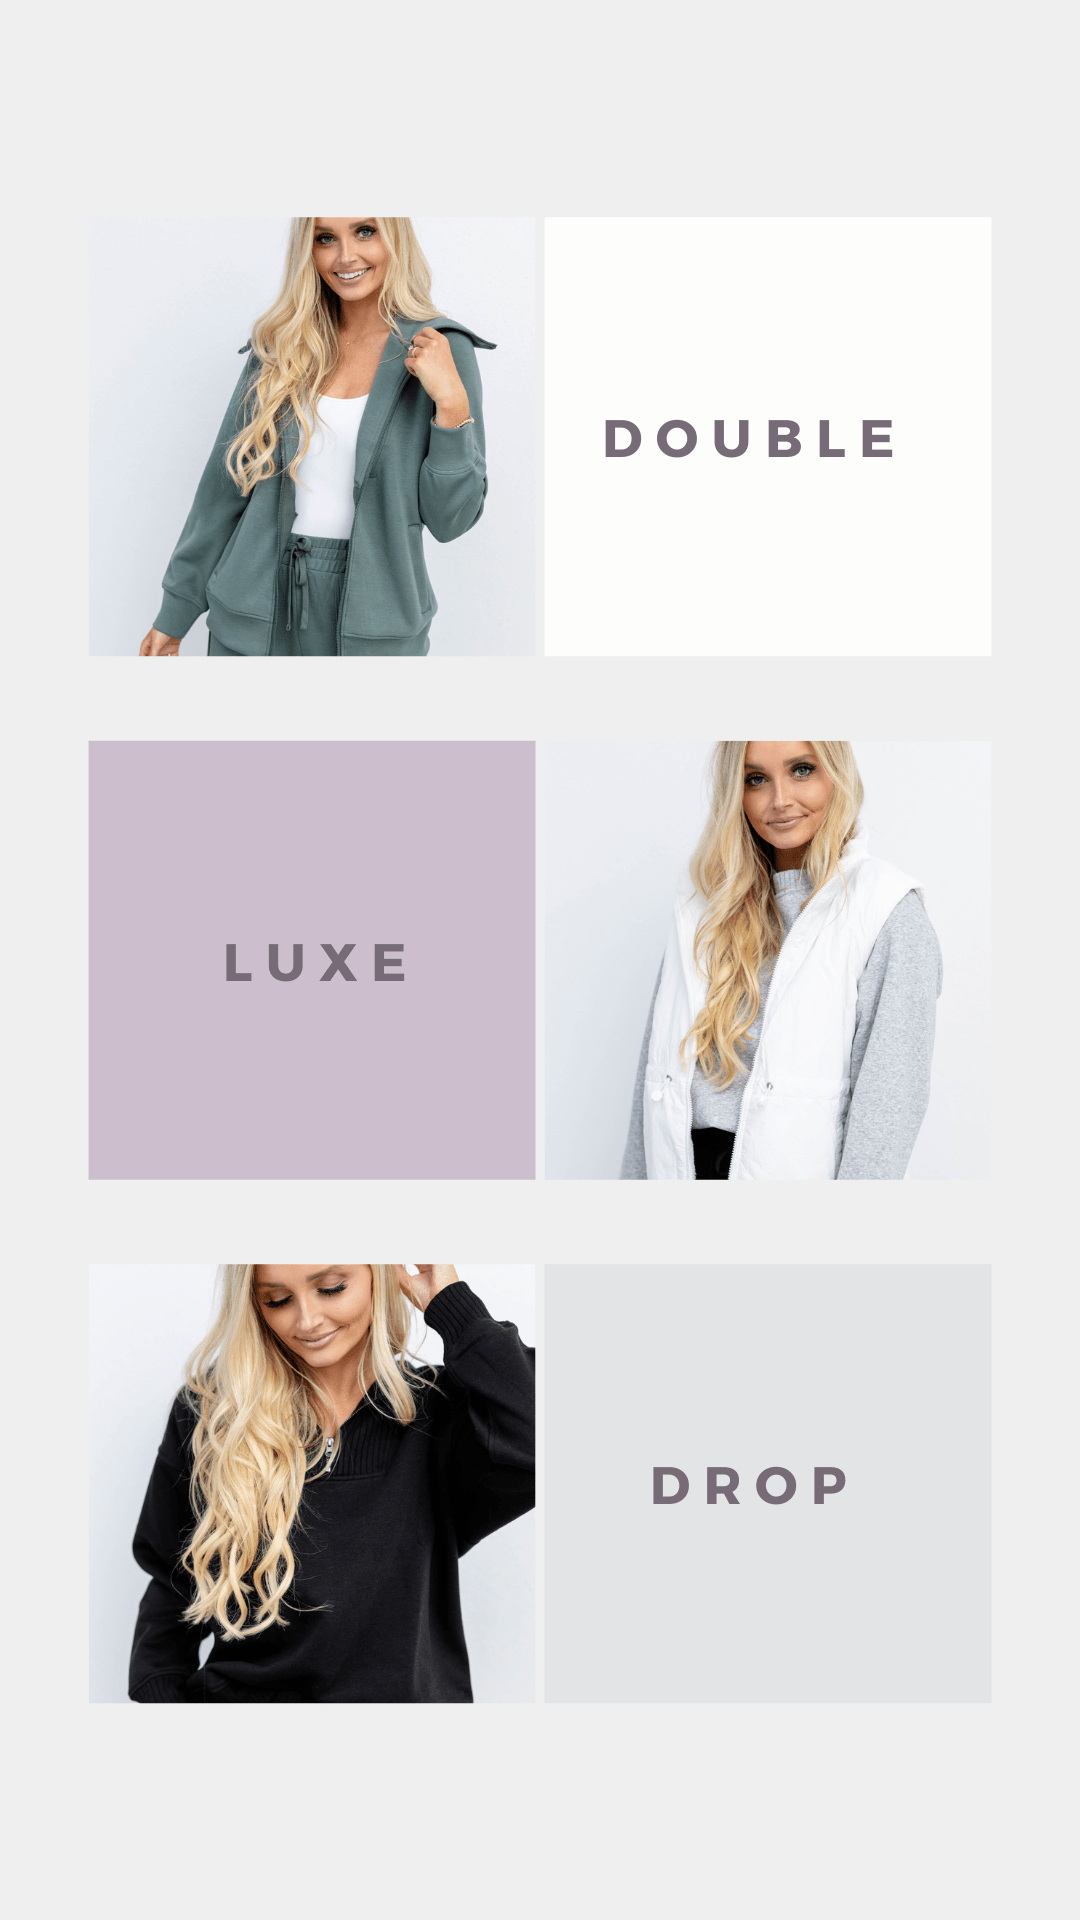 DoubleLUXE is HERE! - Leela and Lavender